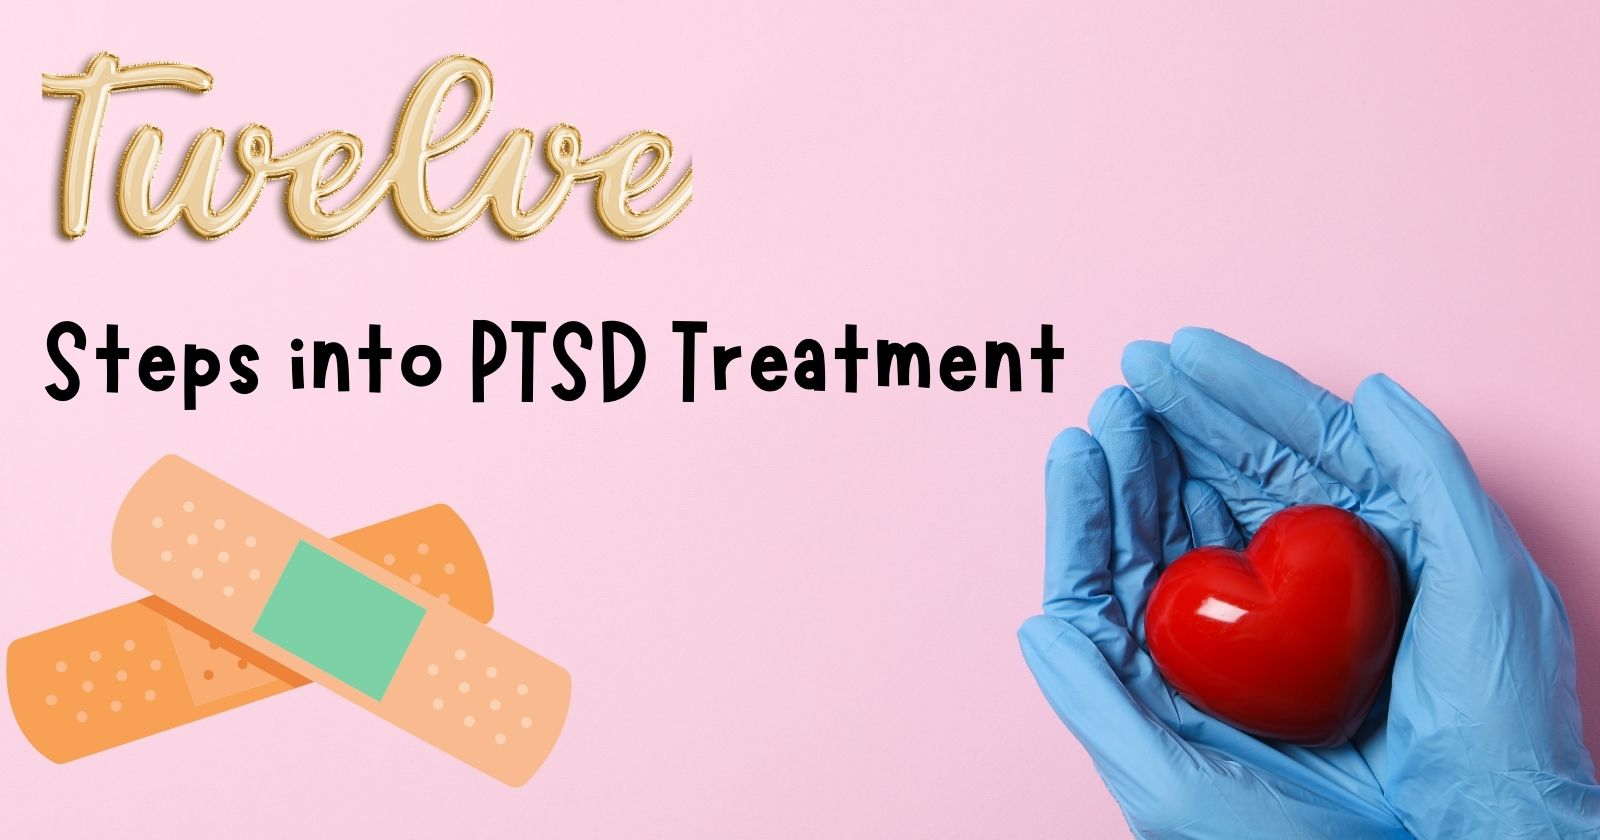 12 Steps into PTSD Treatment

Hand holding red heart and bandages on the left side of picture